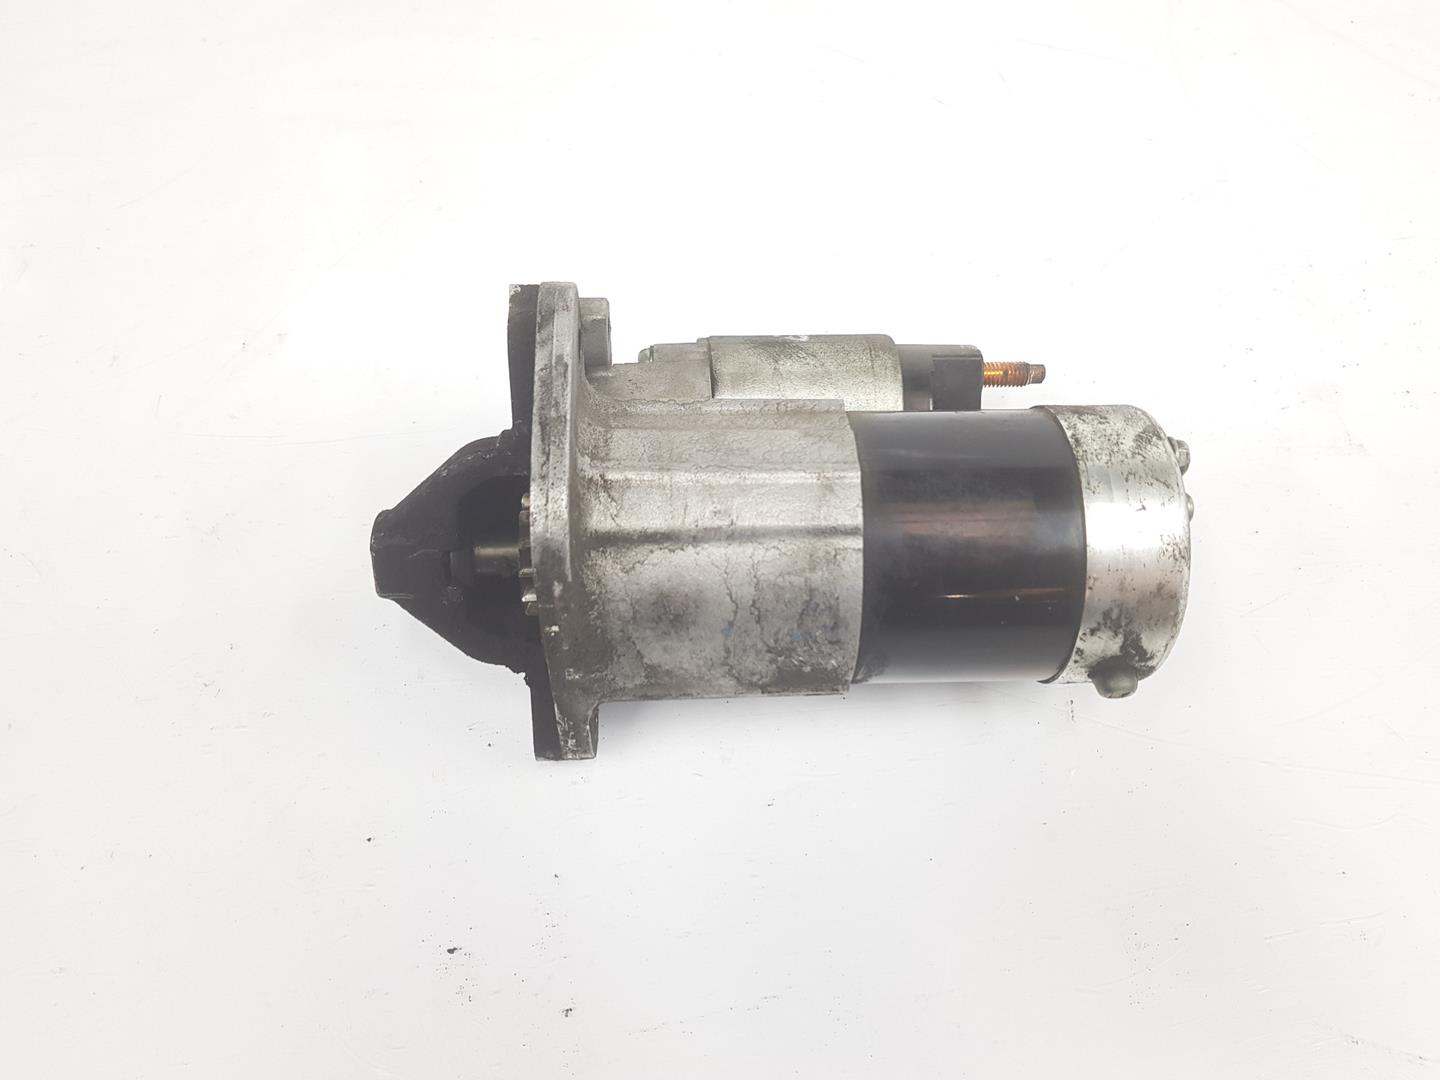 RENAULT Scenic 2 generation (2003-2010) Starter Motor 8200584675A, 8200584675A 20354013